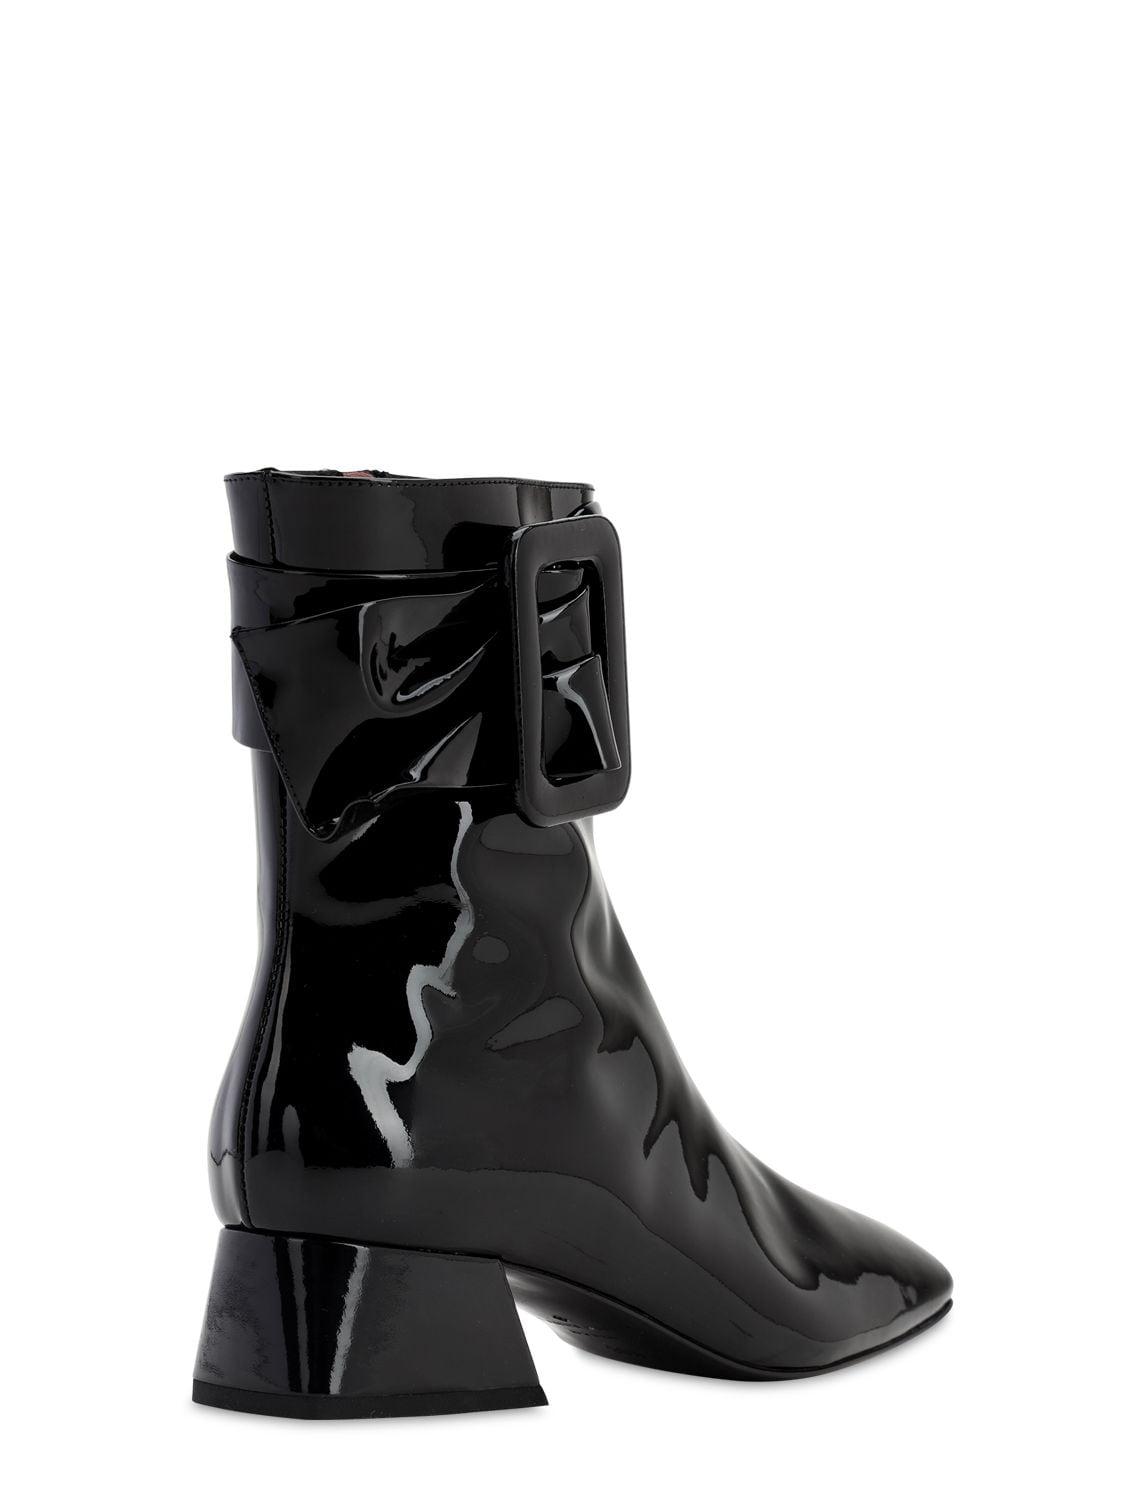 Les Petits Joueurs 40mm Patent Leather Ankle Boots in Black - Lyst